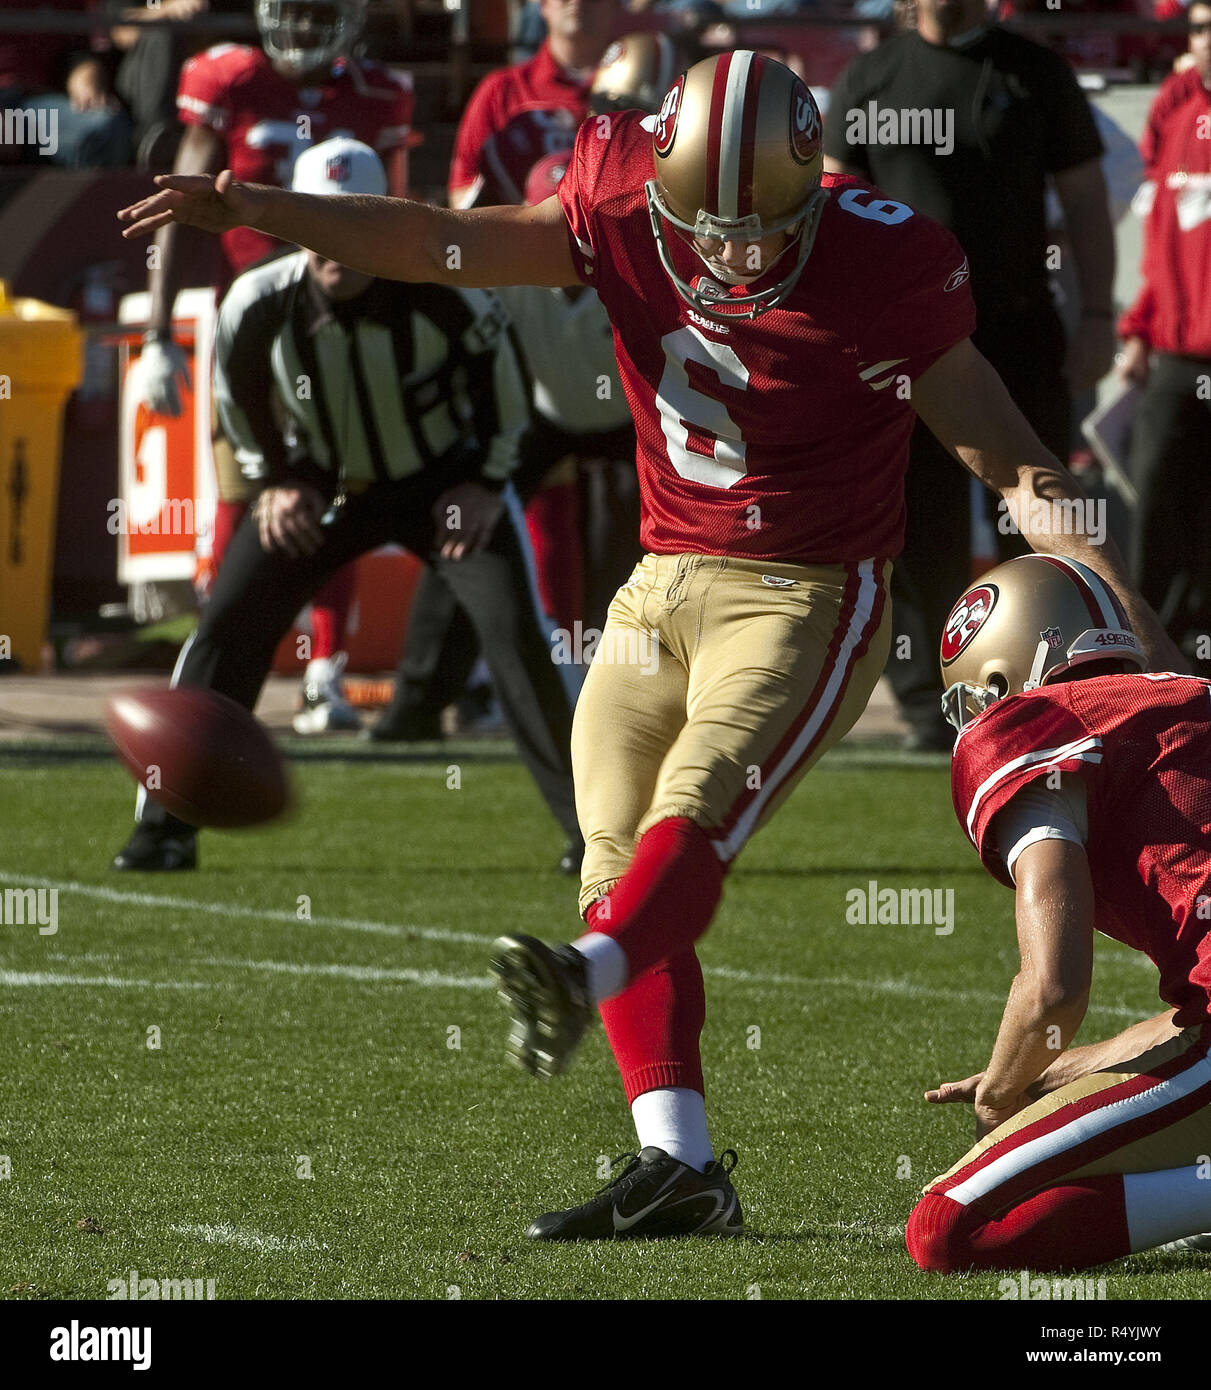 San Francisco, California, USA. 29th Nov, 2009. San Francisco 49ers kicker Joe Nedney #6 makes first point of the day with punter Andy Lee #4 holding on Sunday, November 29, 2009 at Candlestick Park, San Francisco, California. The 49ers defeated the Jaguars 20-3. Credit: Al Golub/ZUMA Wire/Alamy Live News Stock Photo